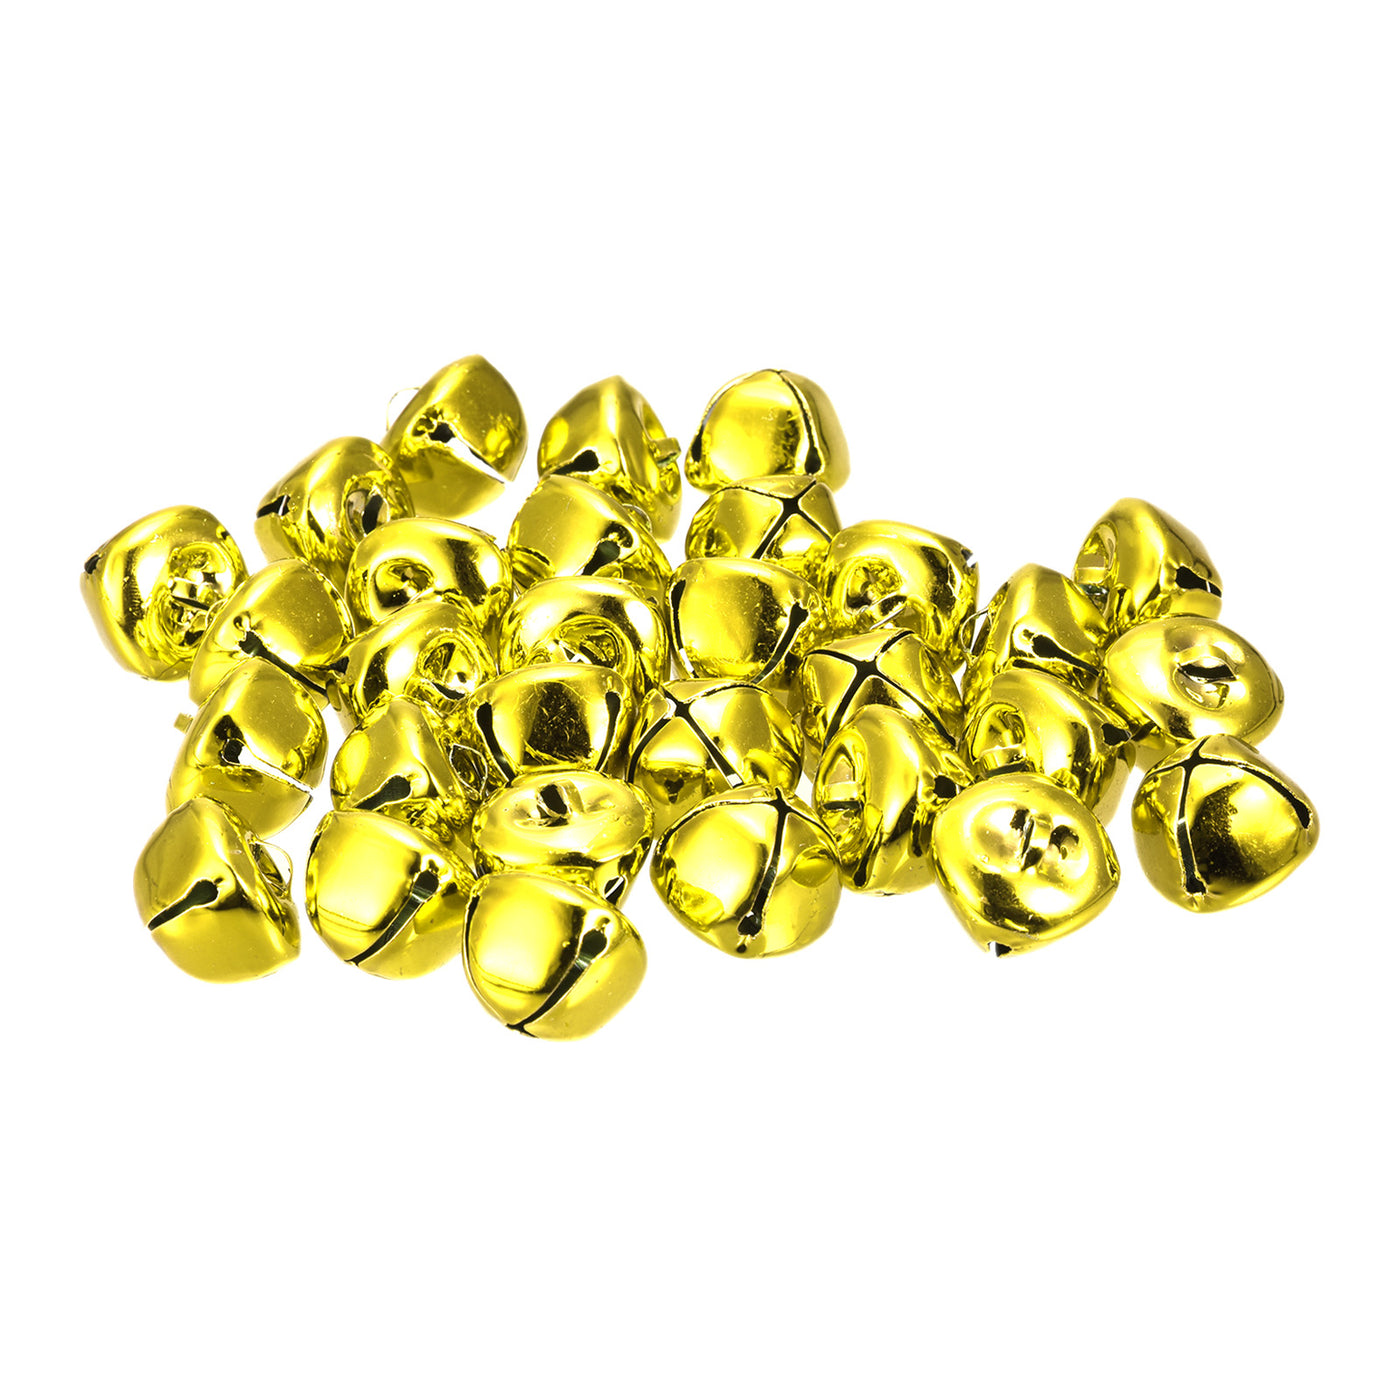 uxcell Uxcell Jingle Bells, 20mm 120pcs Small Bells for Crafts DIY Christmas, Gold Tone